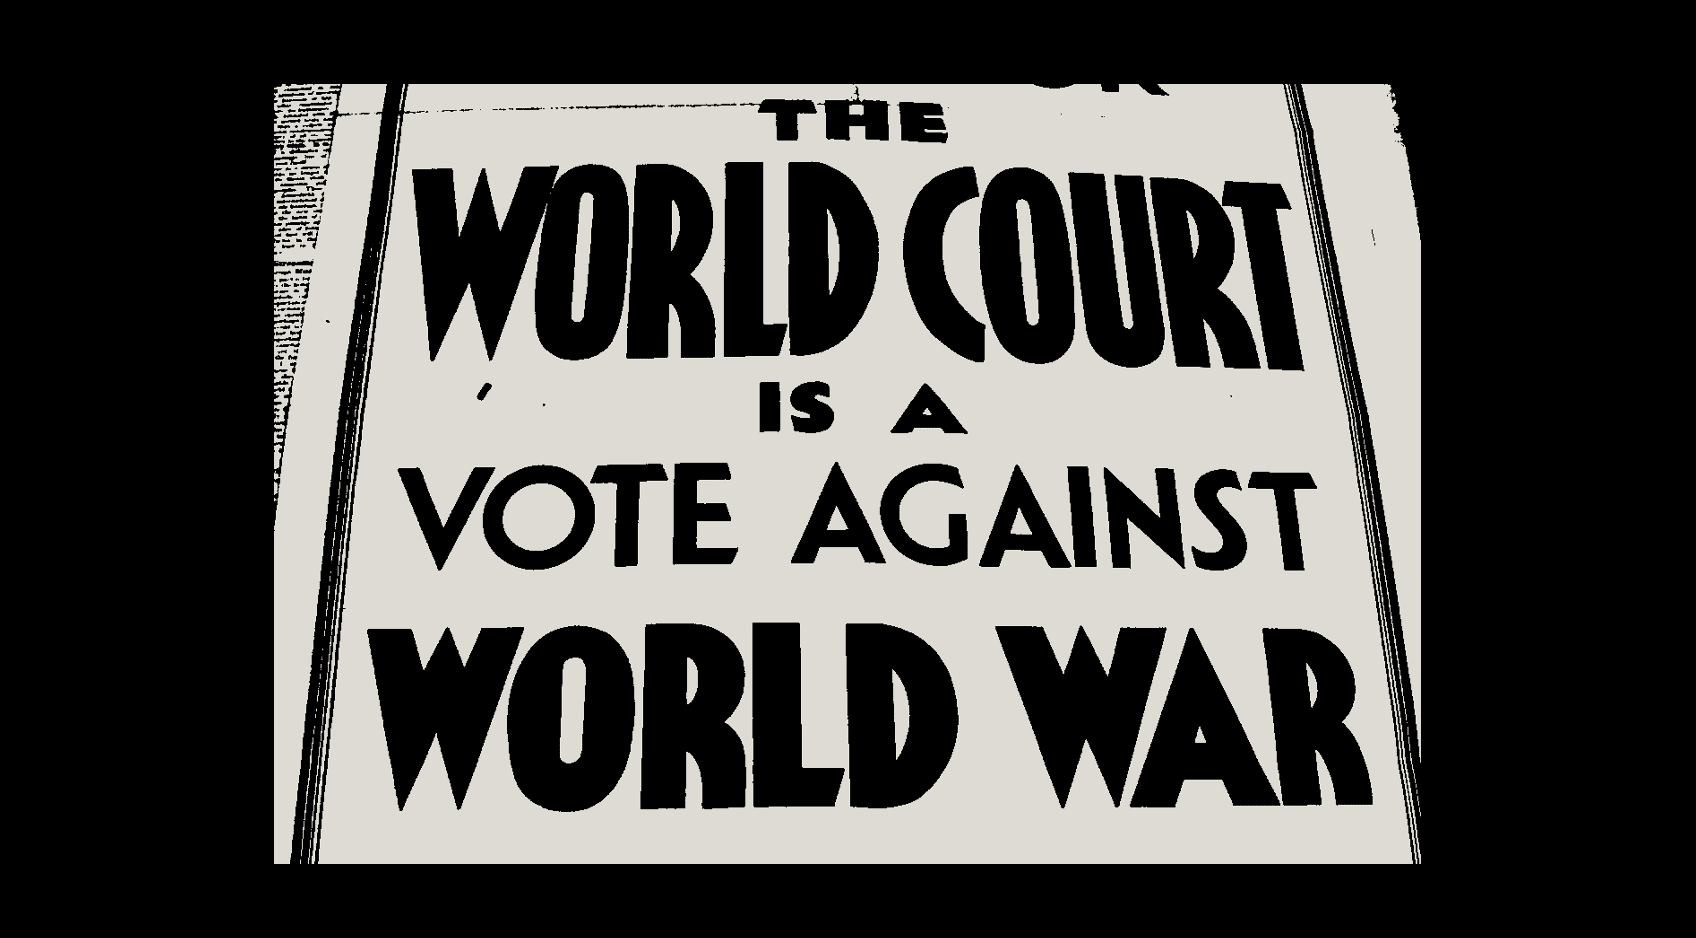 Historic poster, black text on white background stating, "The world court is a vote against world war."